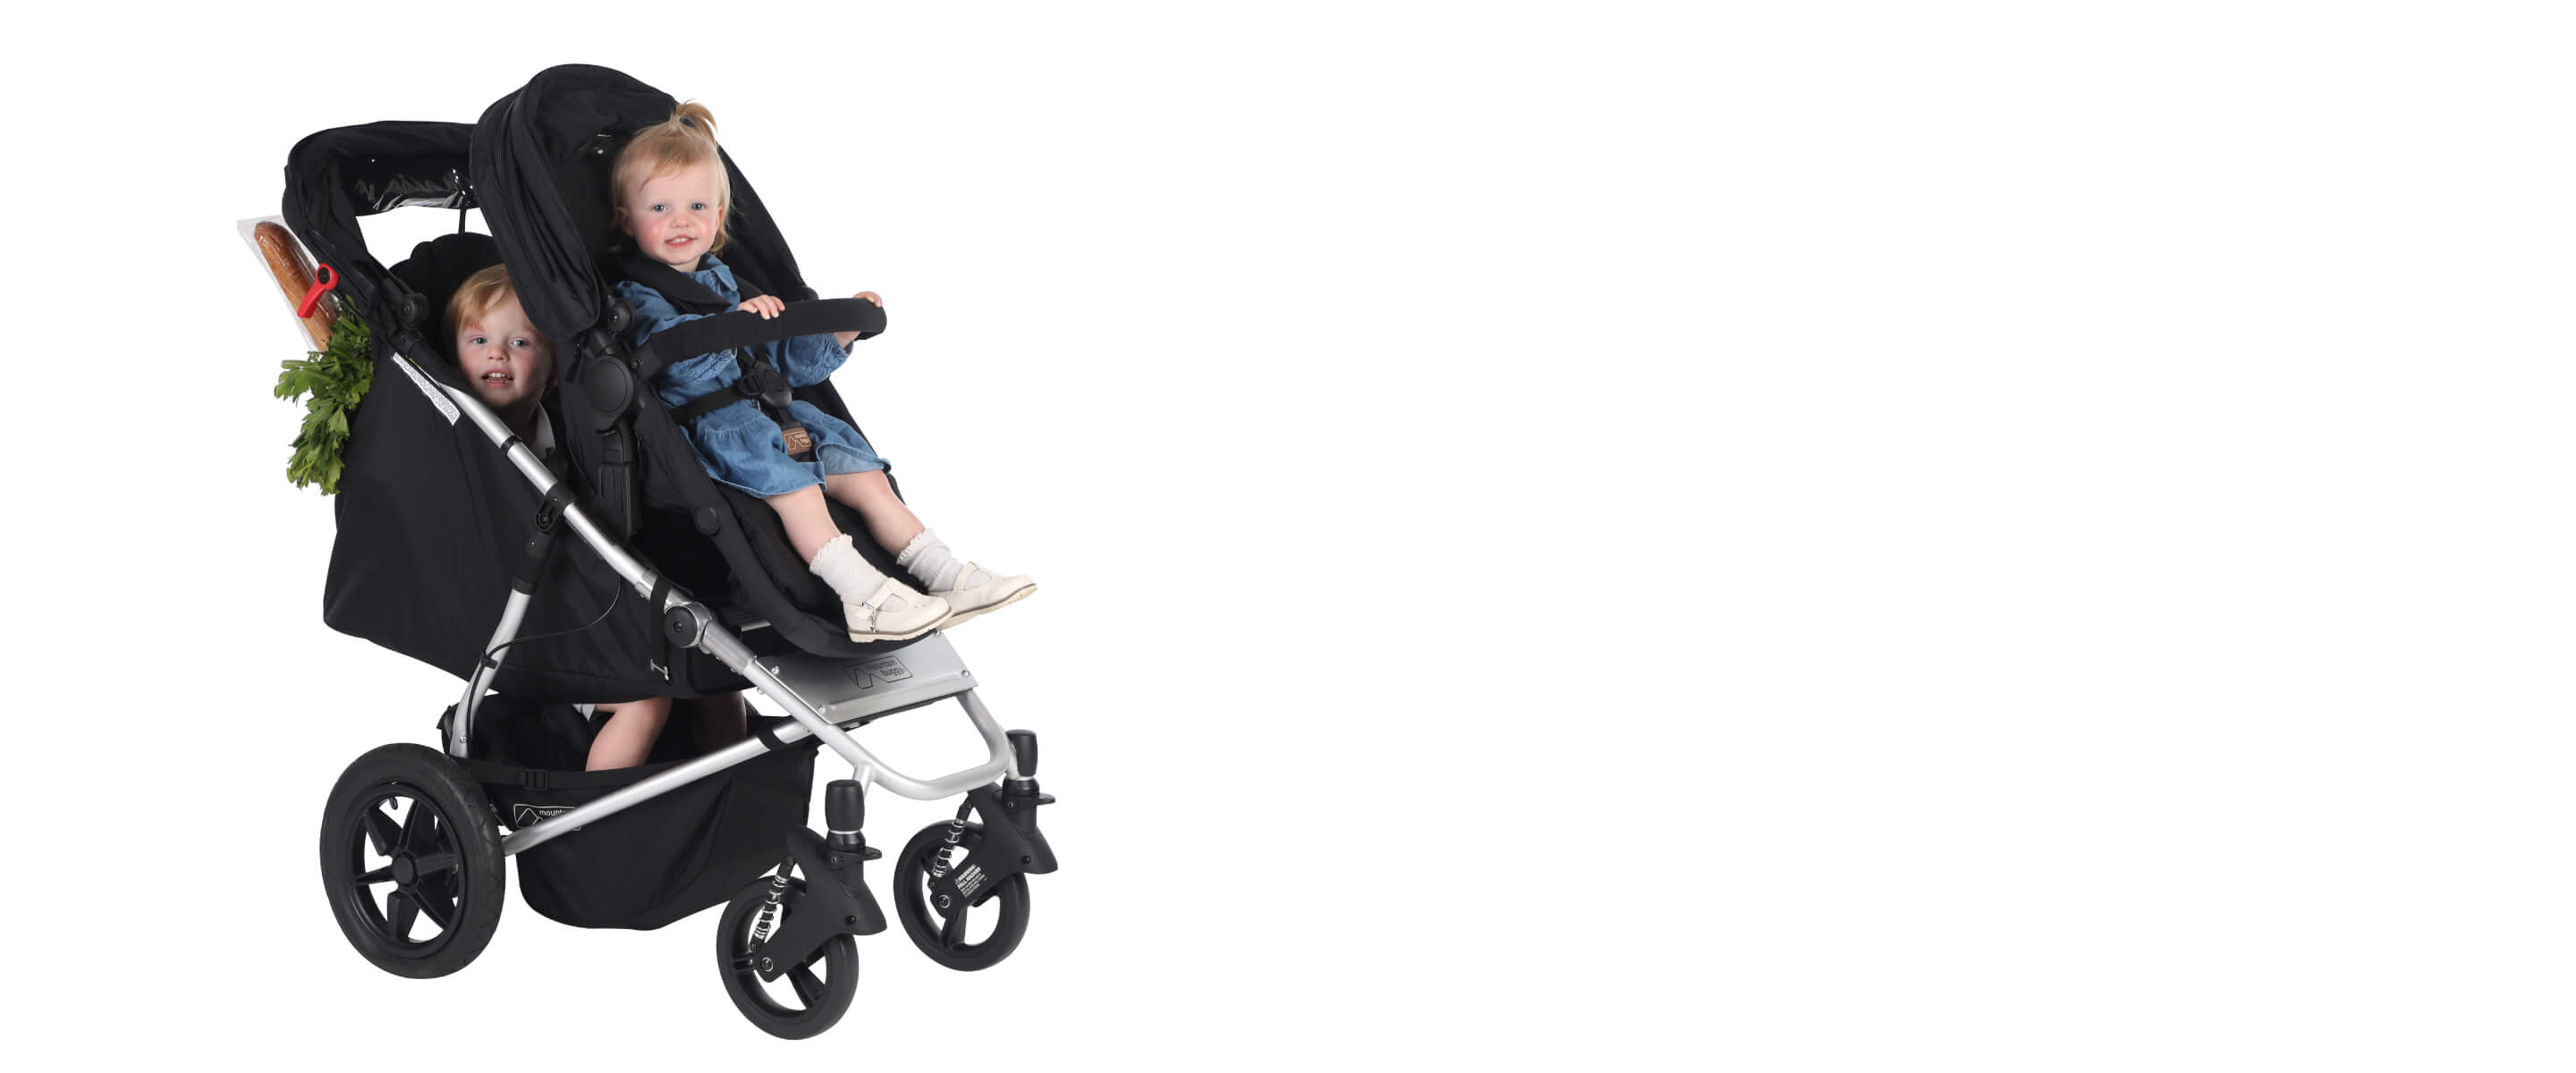 built from the platform that brought all terrain to the worldworld class in safety, stability and materialsall-in-one bundlerevolutionary use of a modular seat unit with a fabric sling seatnewborn readymore capacity for storage